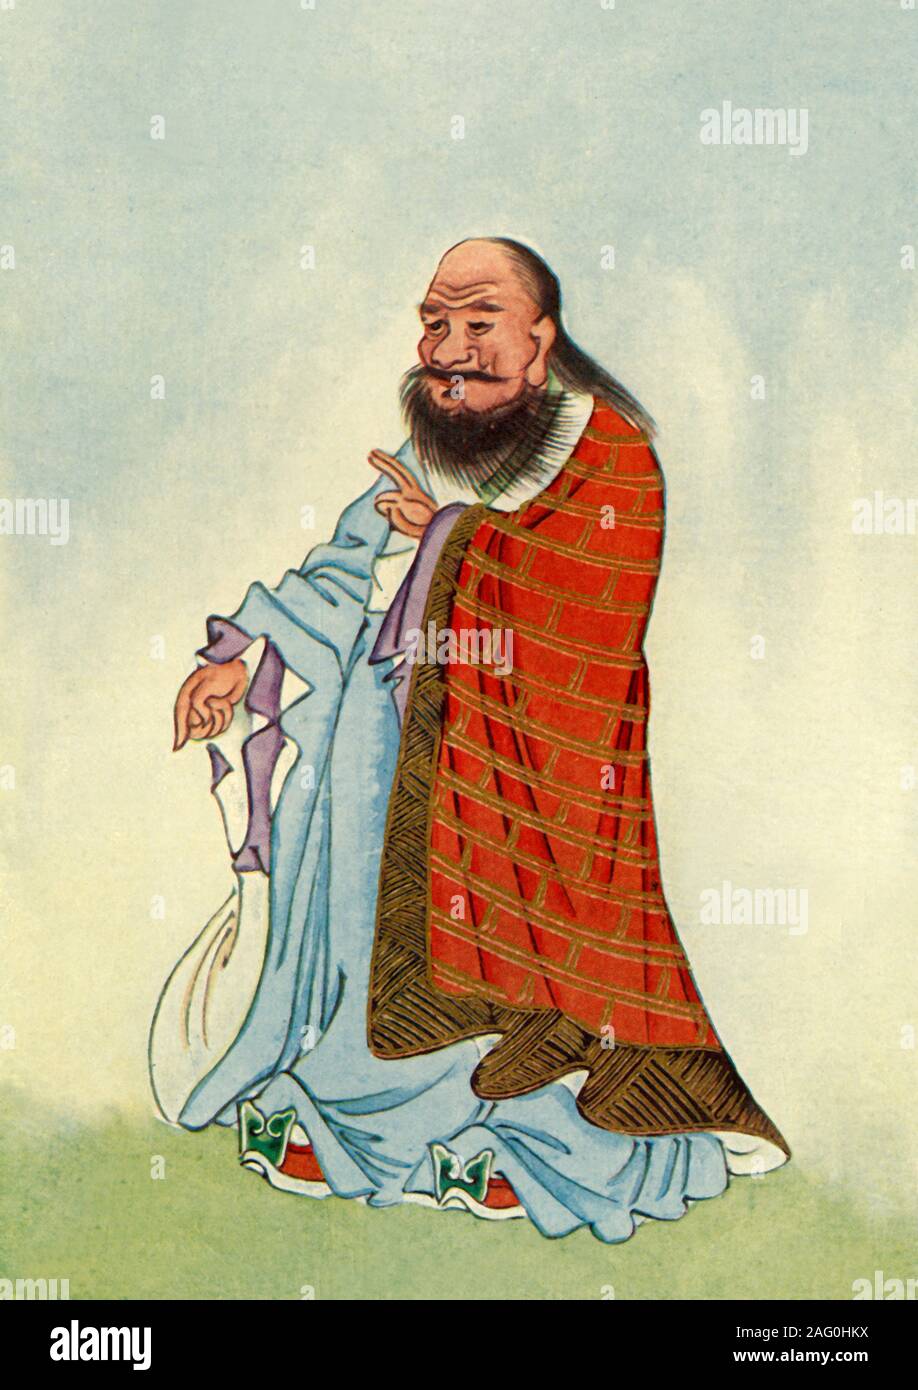 https://c8.alamy.com/comp/2AG0HKX/lao-tzu-1922-lao-tzu-ancient-chinese-philosopher-and-writer-reputedly-of-the-tao-te-ching-and-founder-of-philosophical-taoism-from-quotmyths-and-legends-of-chinaquot-by-e-t-c-werner-george-g-harrap-amp-co-ltd-london-calcutta-sydney-1922-2AG0HKX.jpg